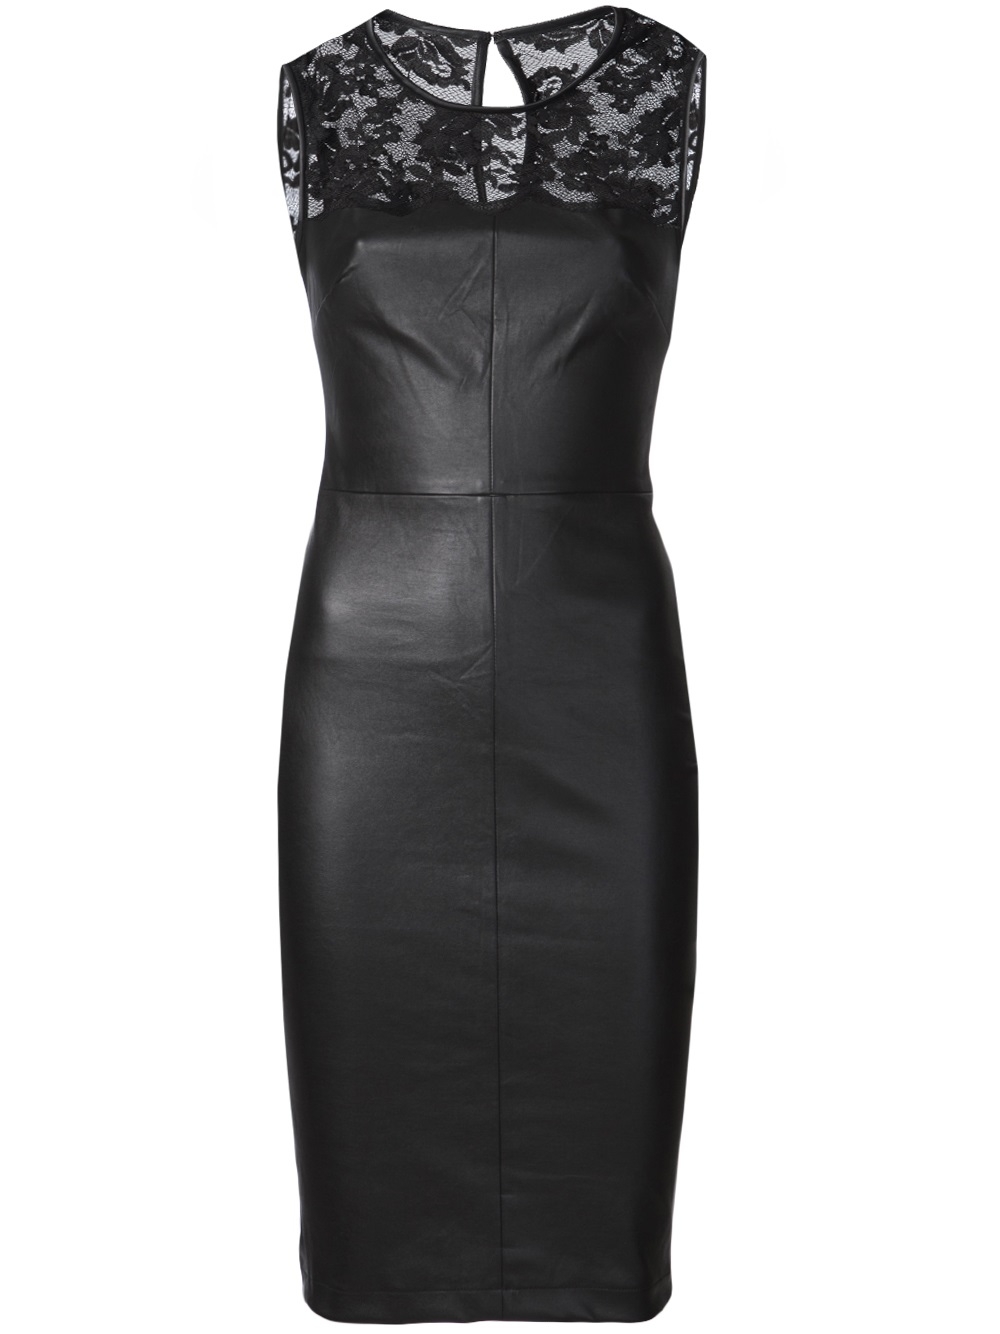 Lyst - Robert Rodriguez Leather and Lace Dress in Black